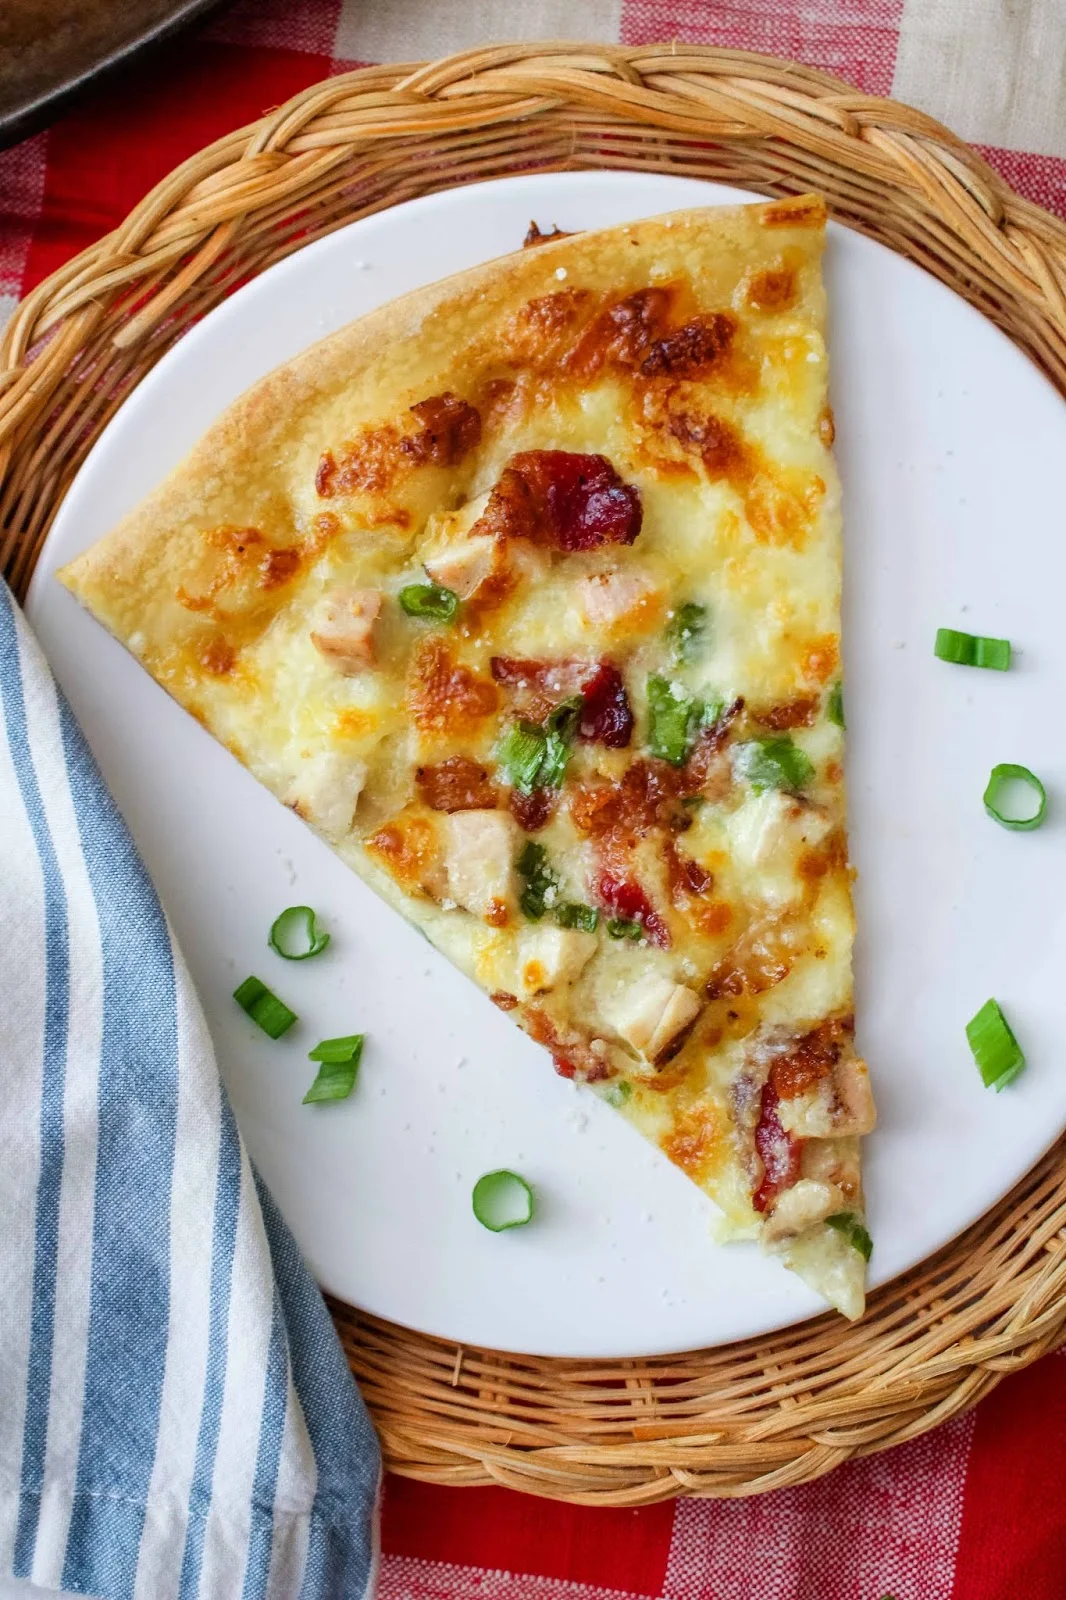 Chicken Alfredo Pizza will rock your pizza night! Topped with cubed chicken, bacon, and cheesy alfredo sauce, this is a pizza you will want to make again and again!  #pizza #chicken #alfredosauce